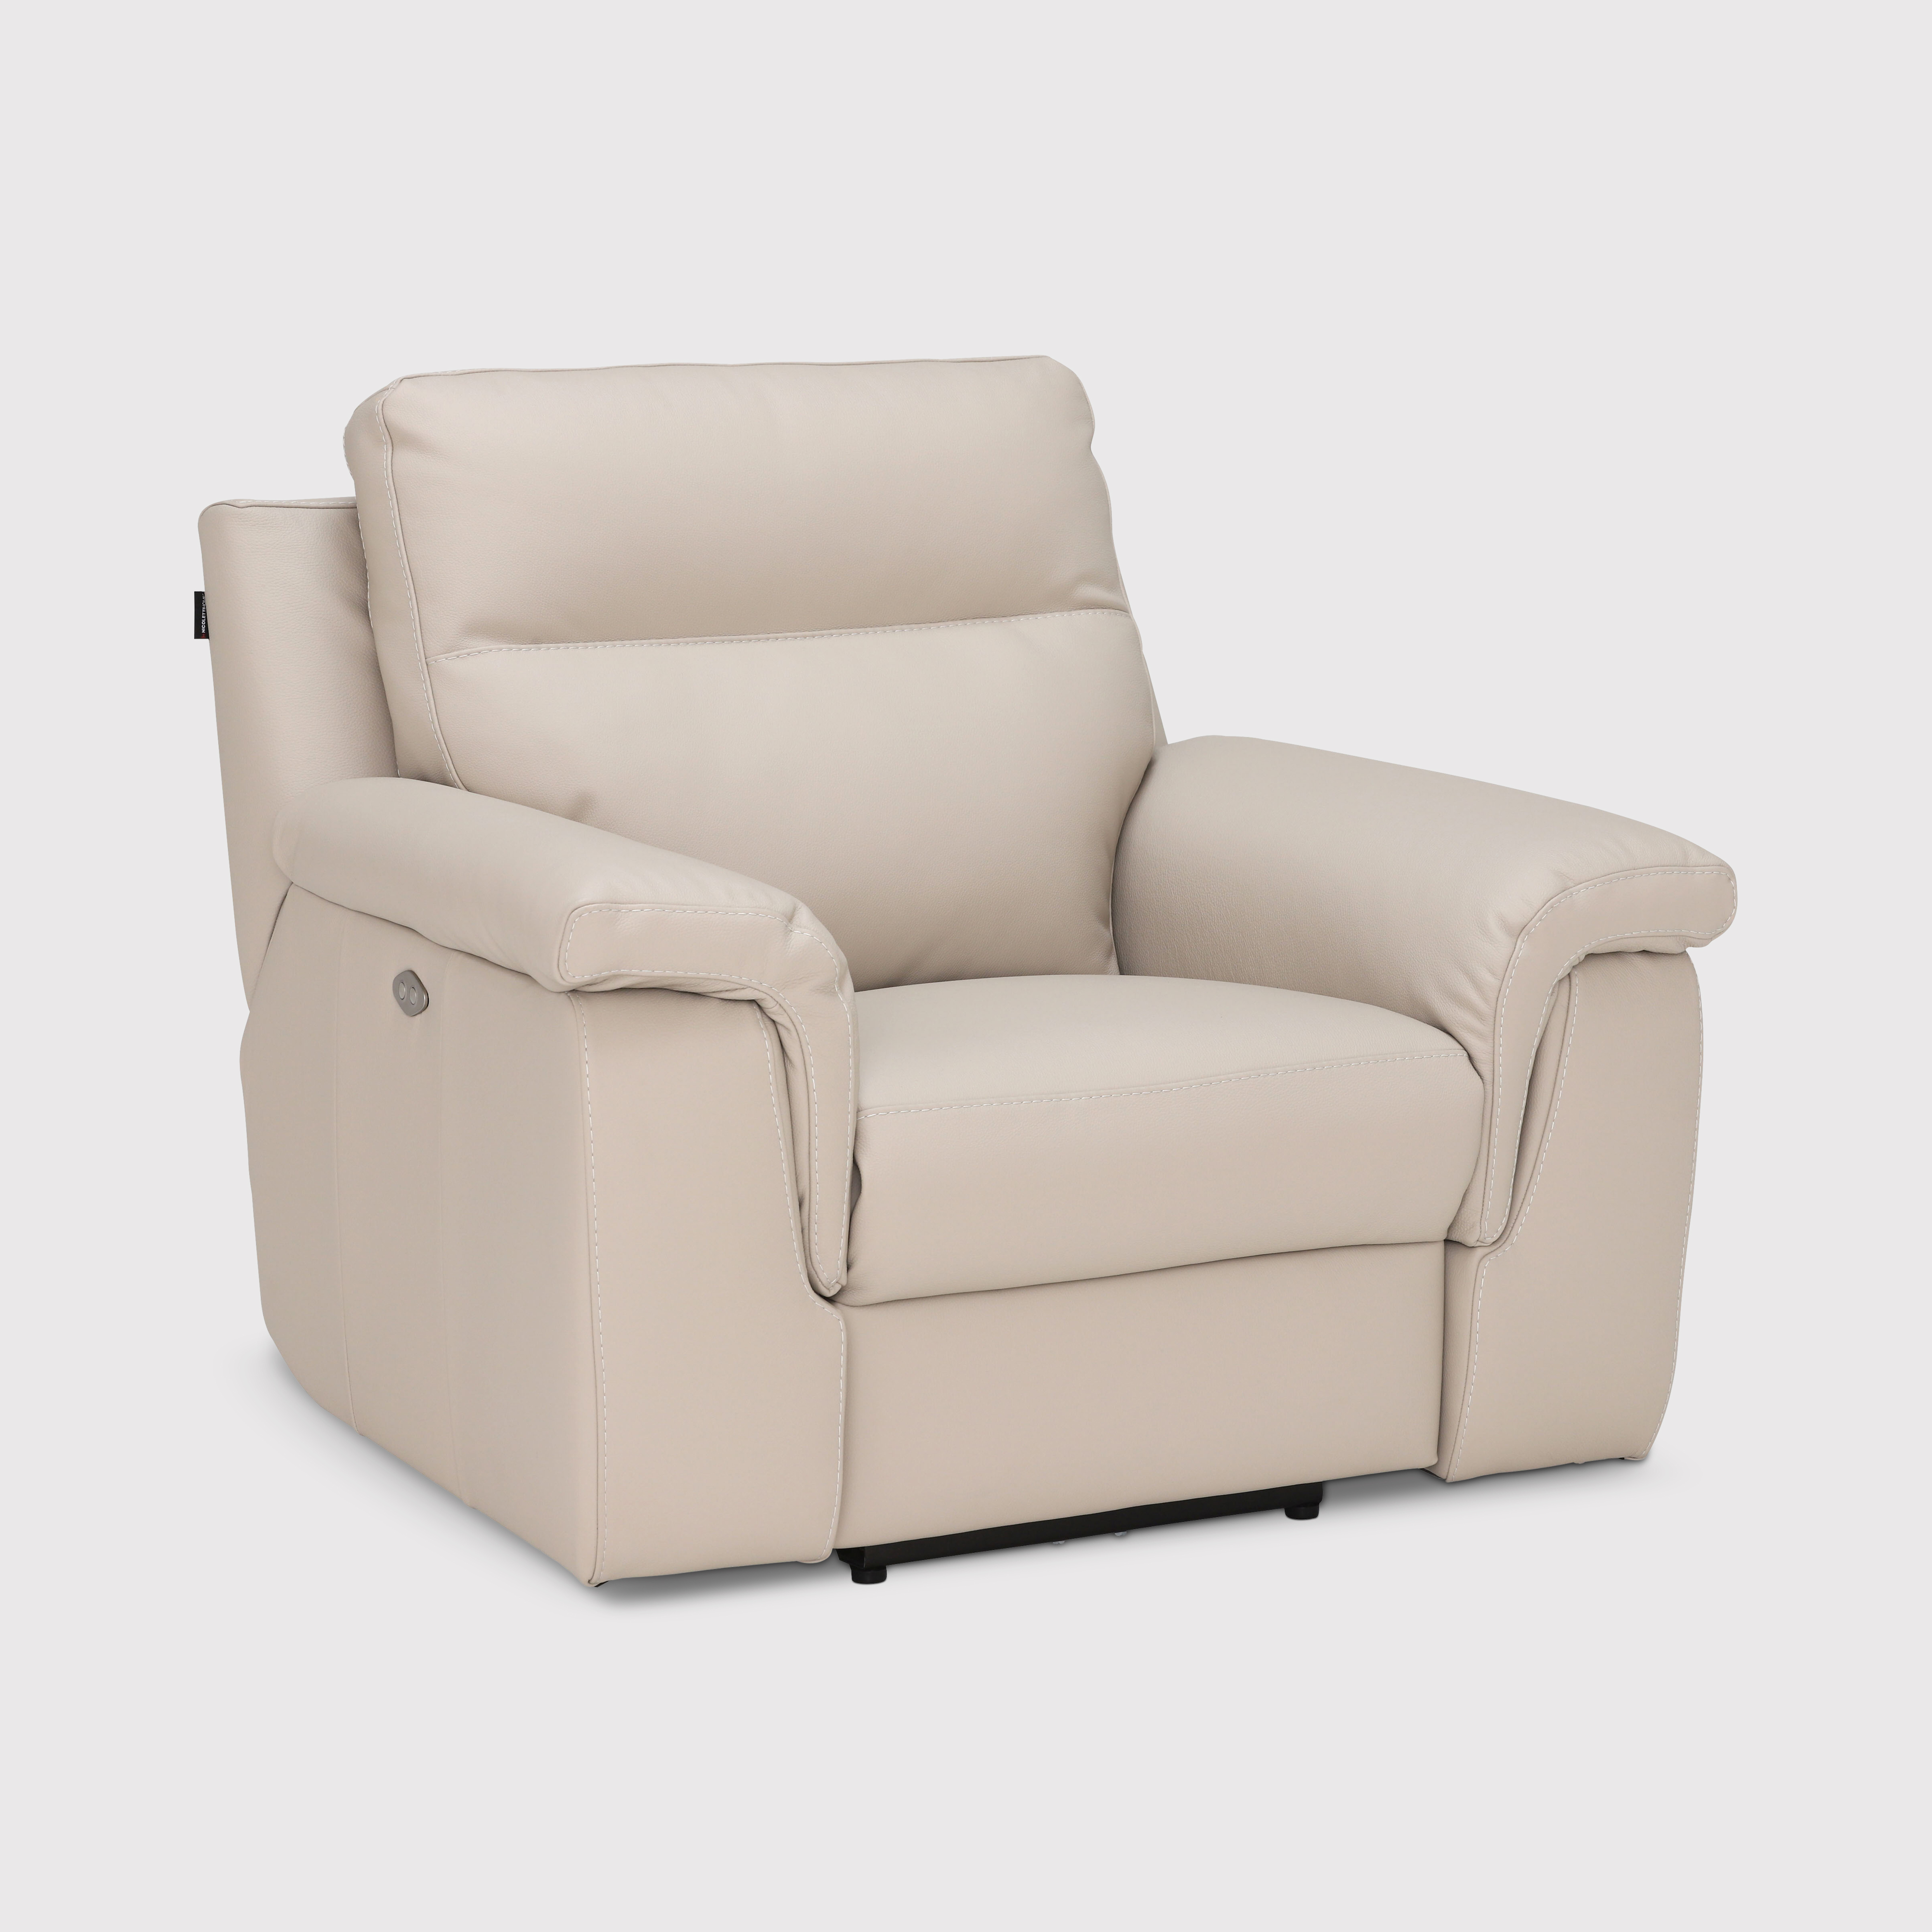 Fulton Recliner Chair With Electric Recliner, Neutral | Barker & Stonehouse